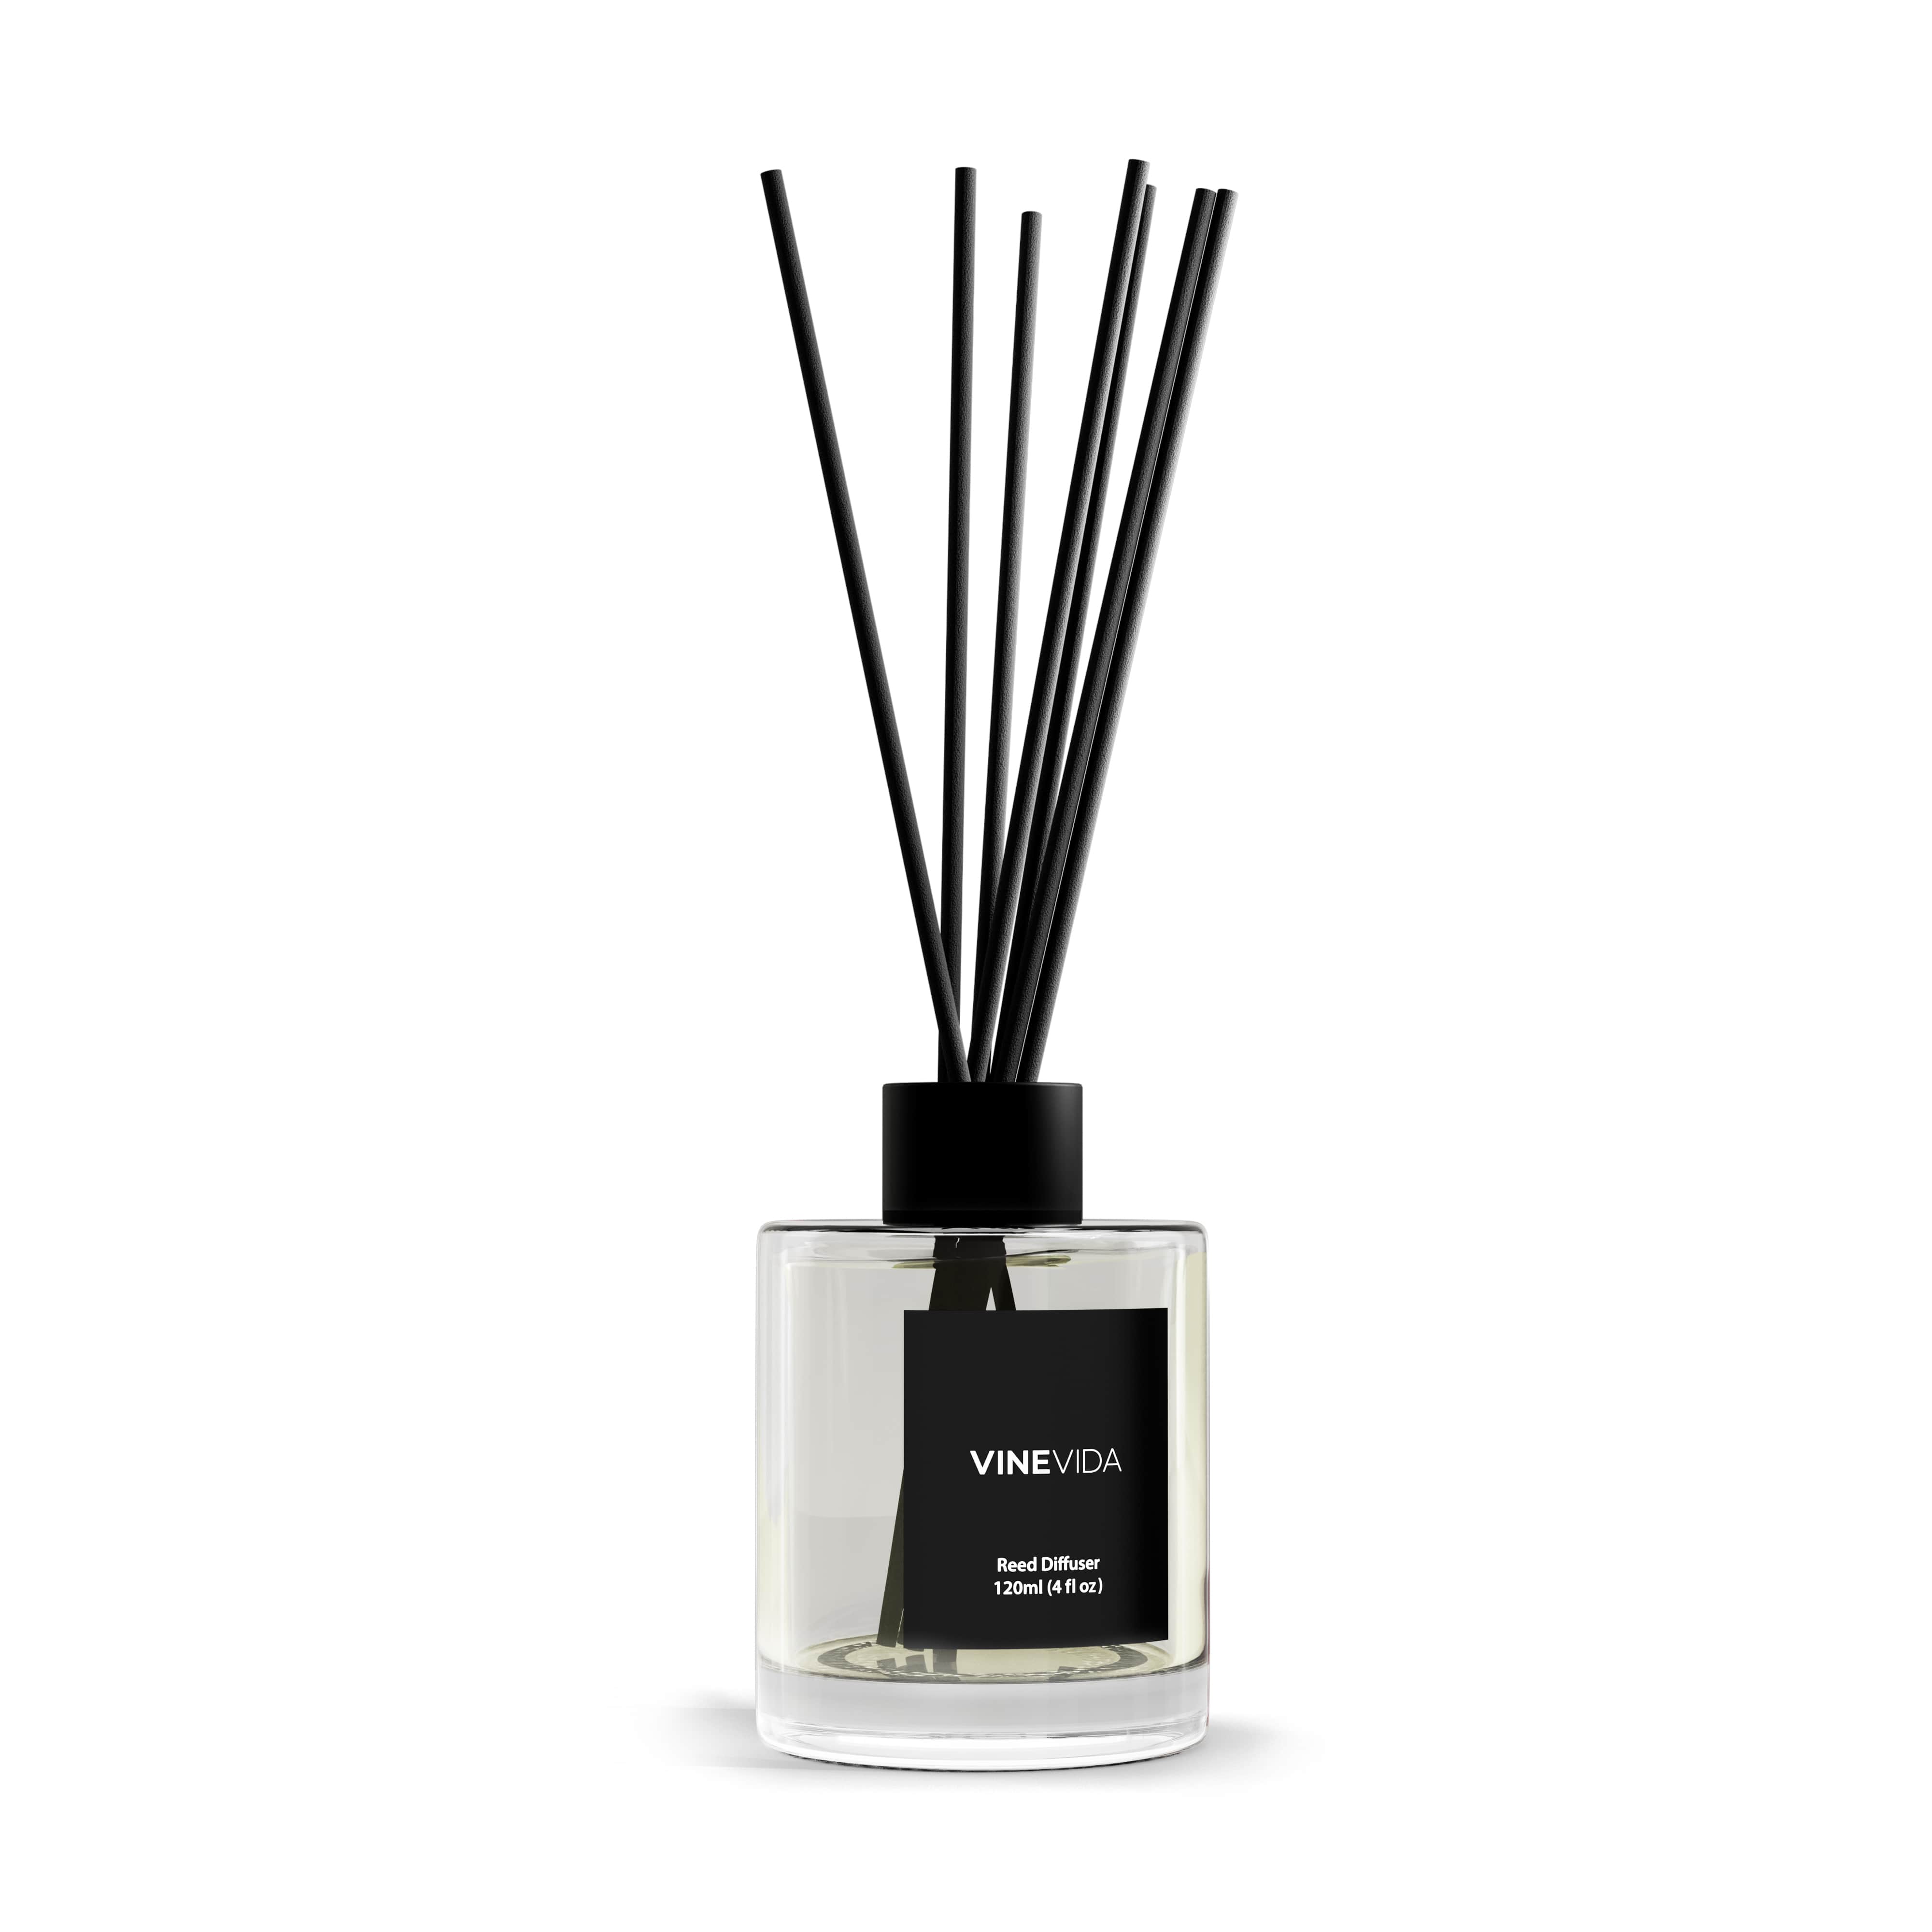 NO. 1109 Reed Diffuser - Inspired by: Cucumber Melon by Bath & Body Works